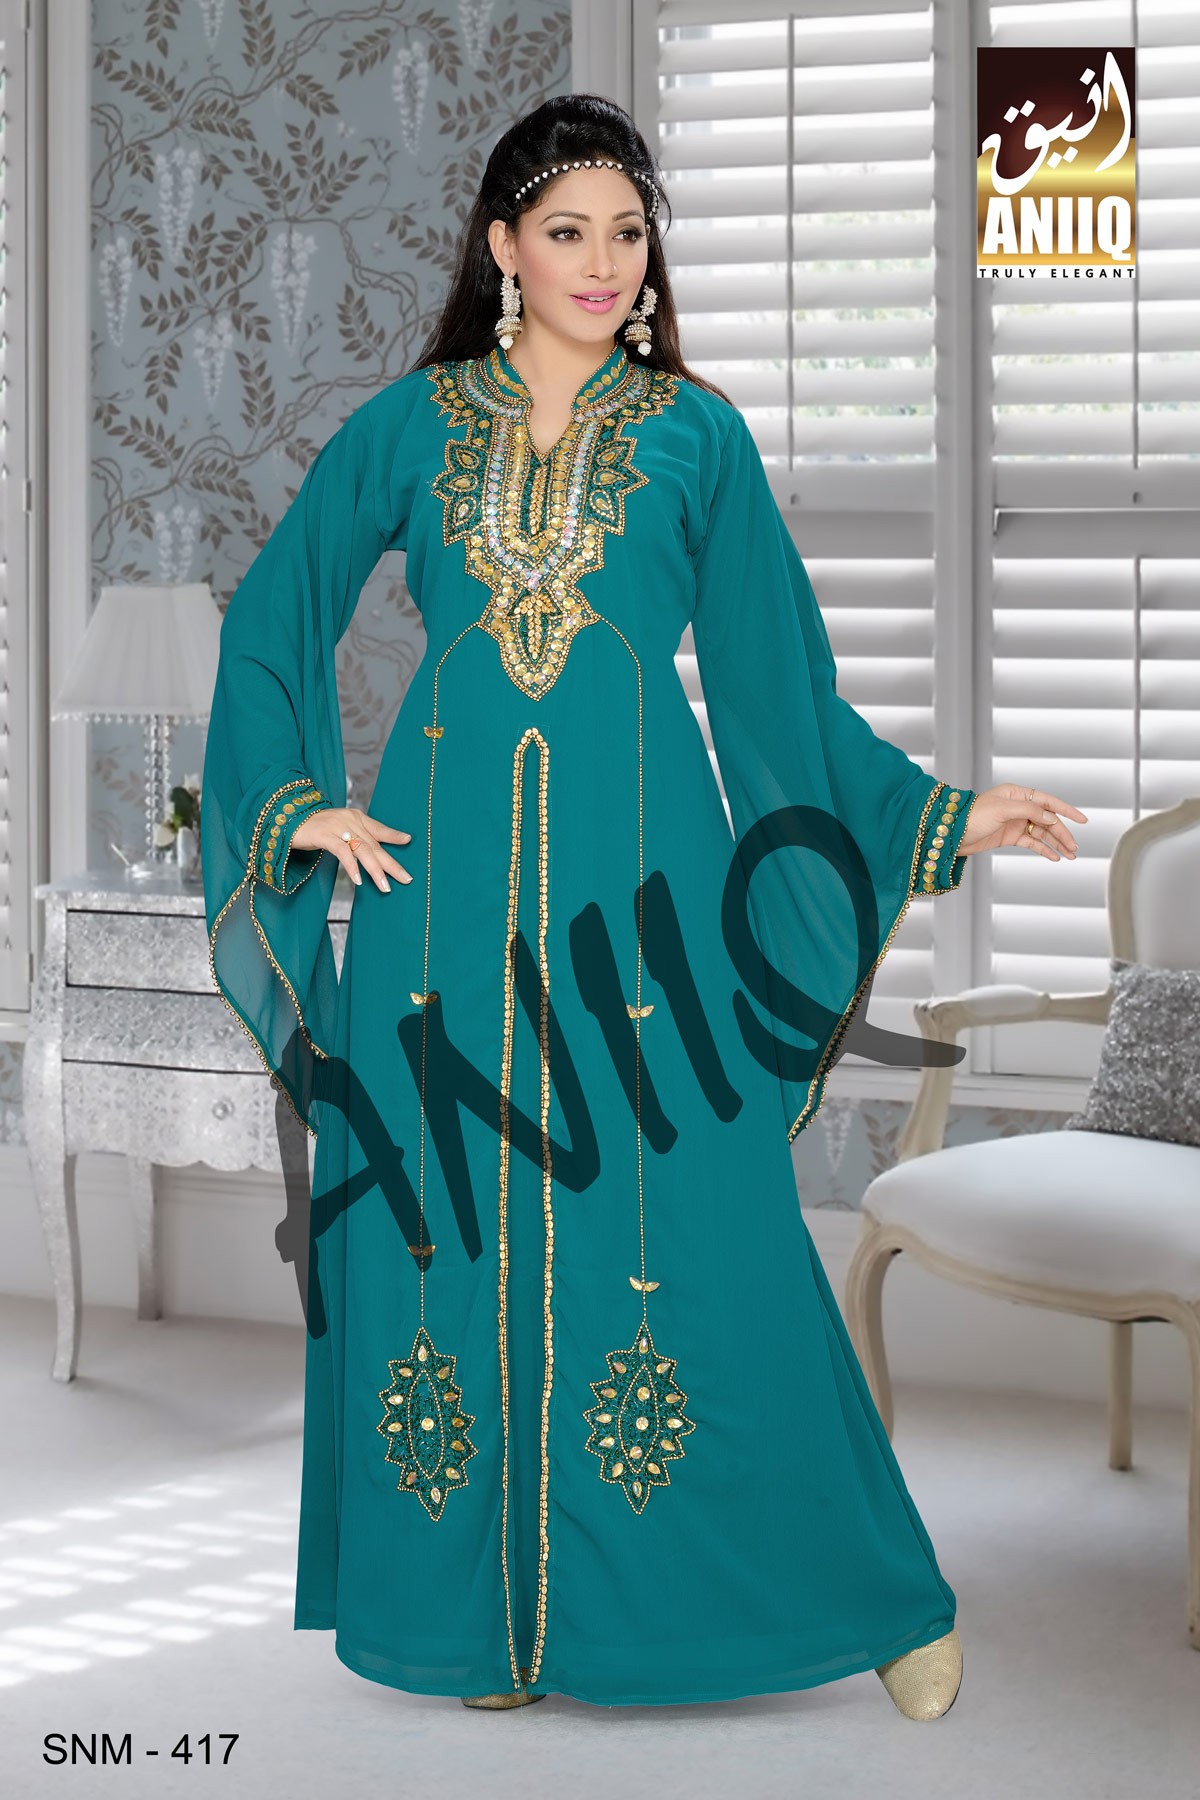 Teal Green   Embroidered   Faux Georgette   Kaftan